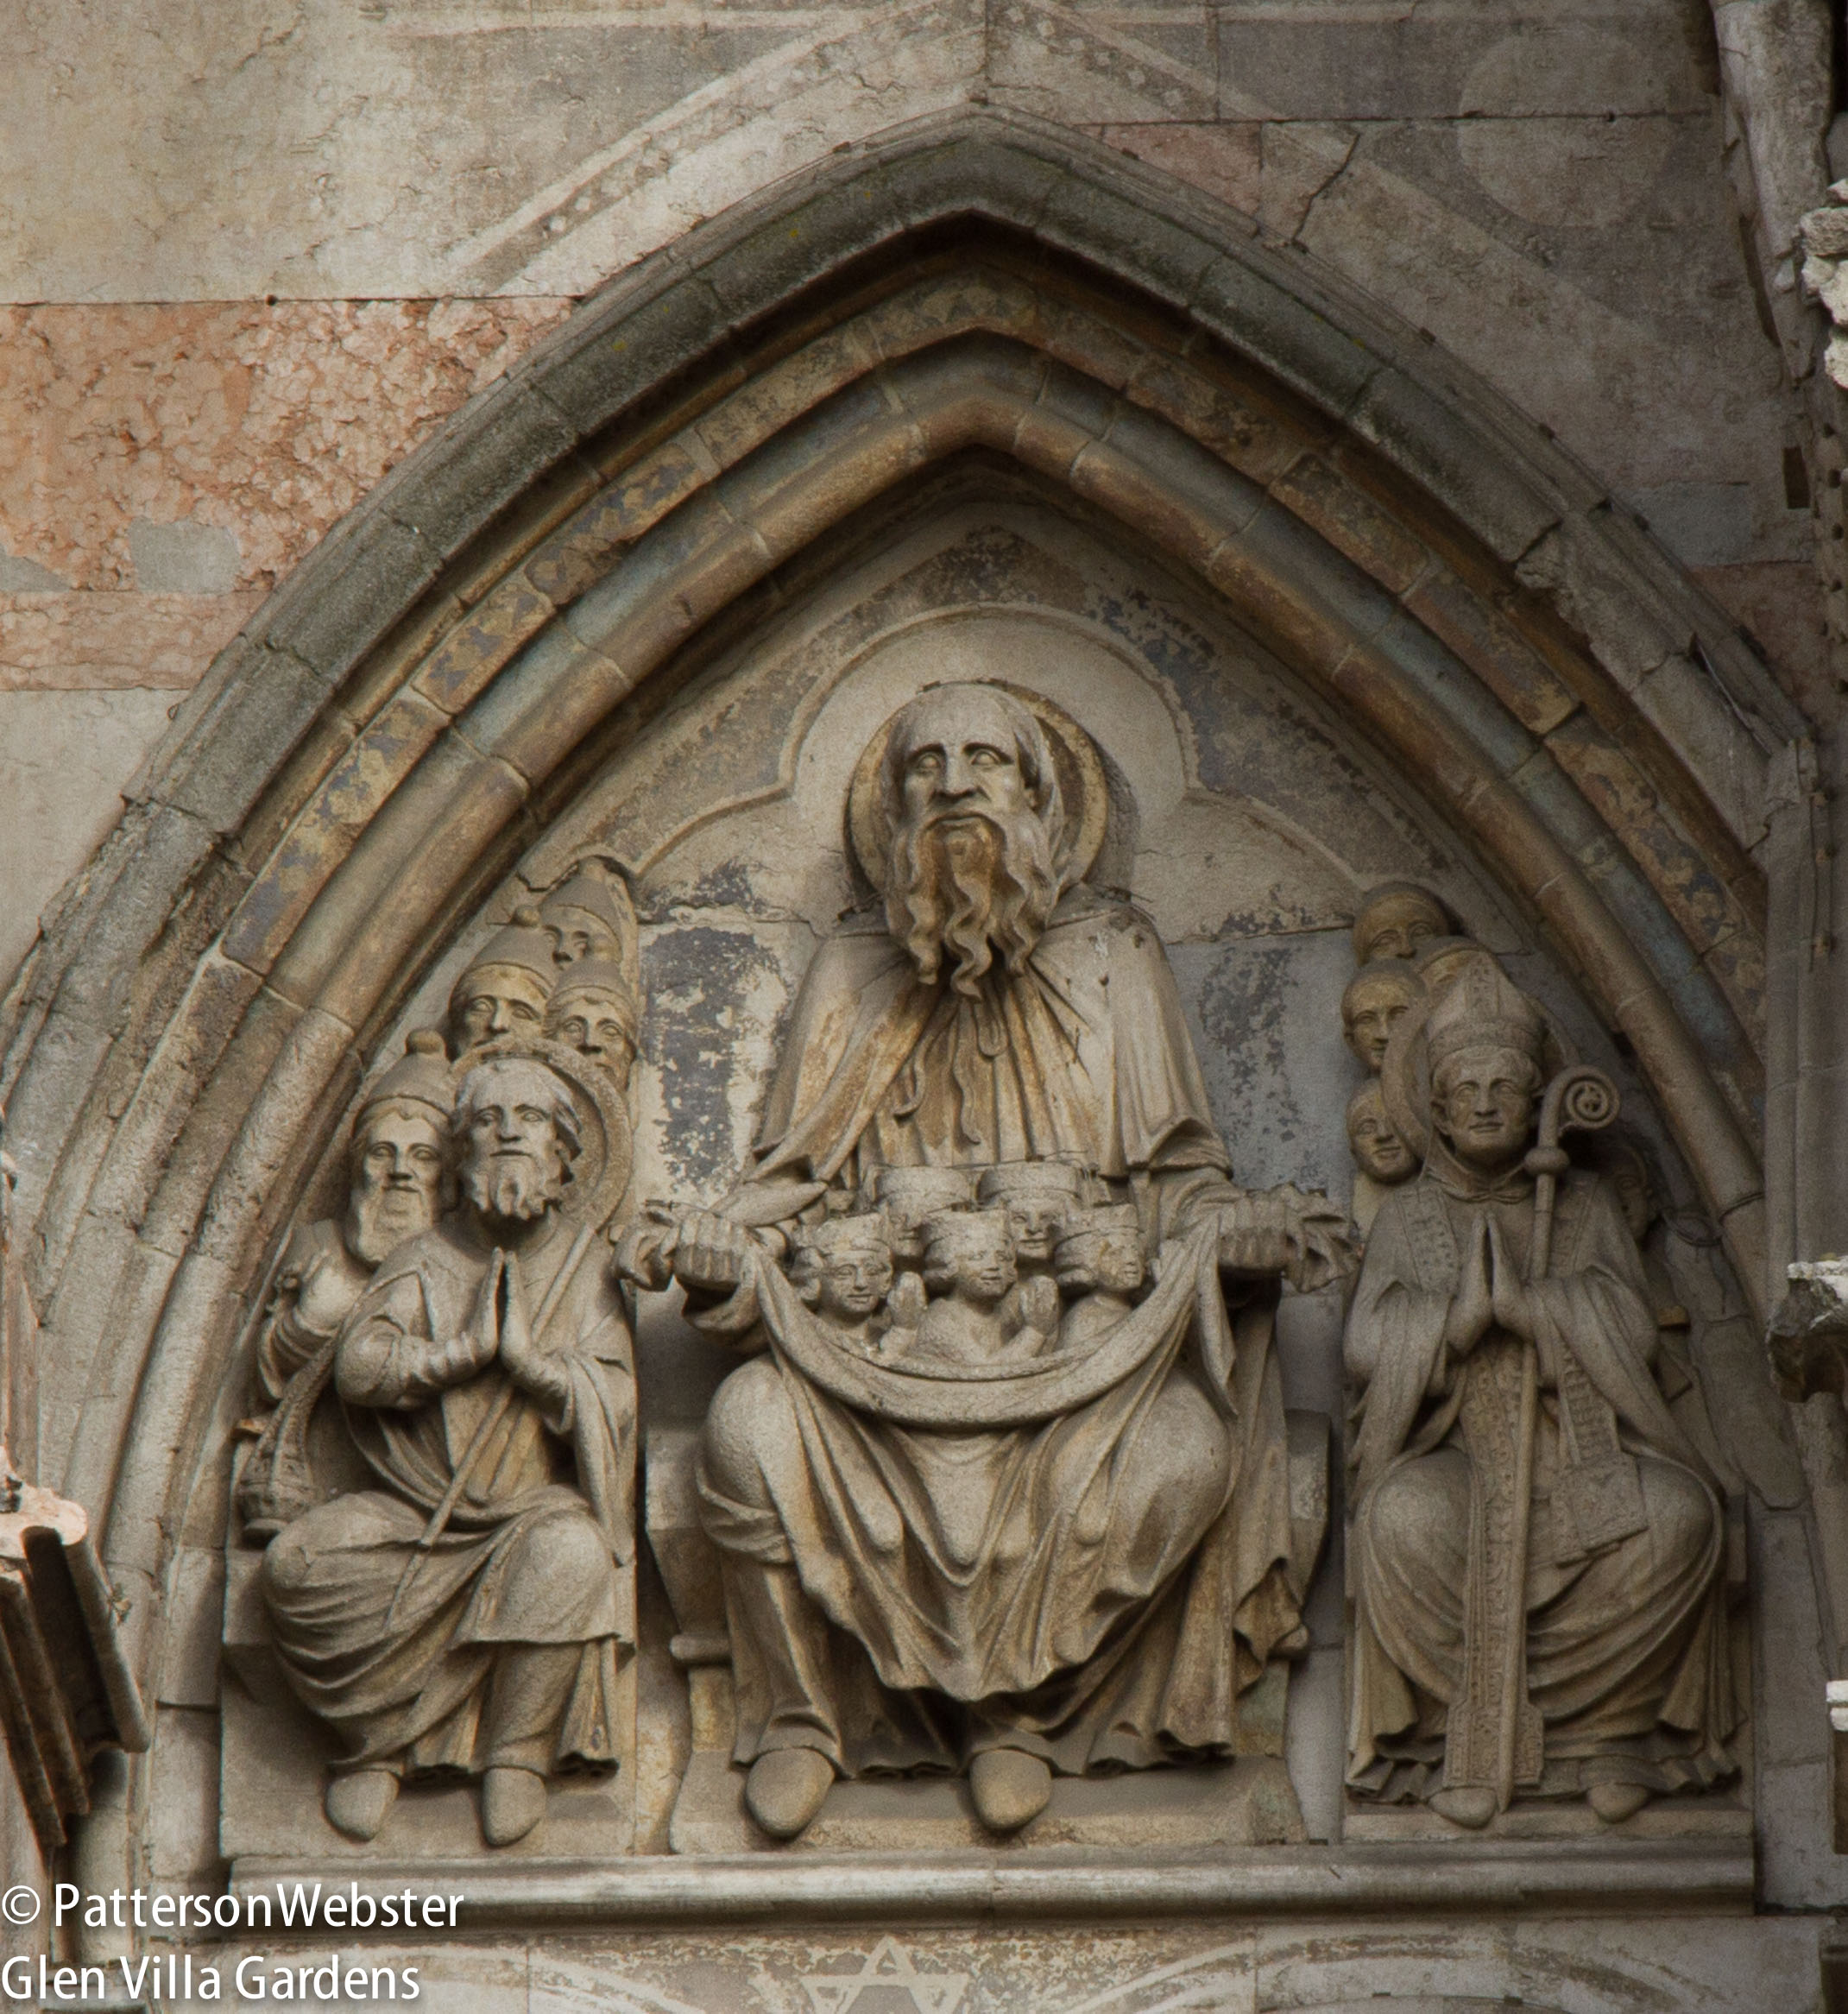 The carving shows details of clothing and hair styles.